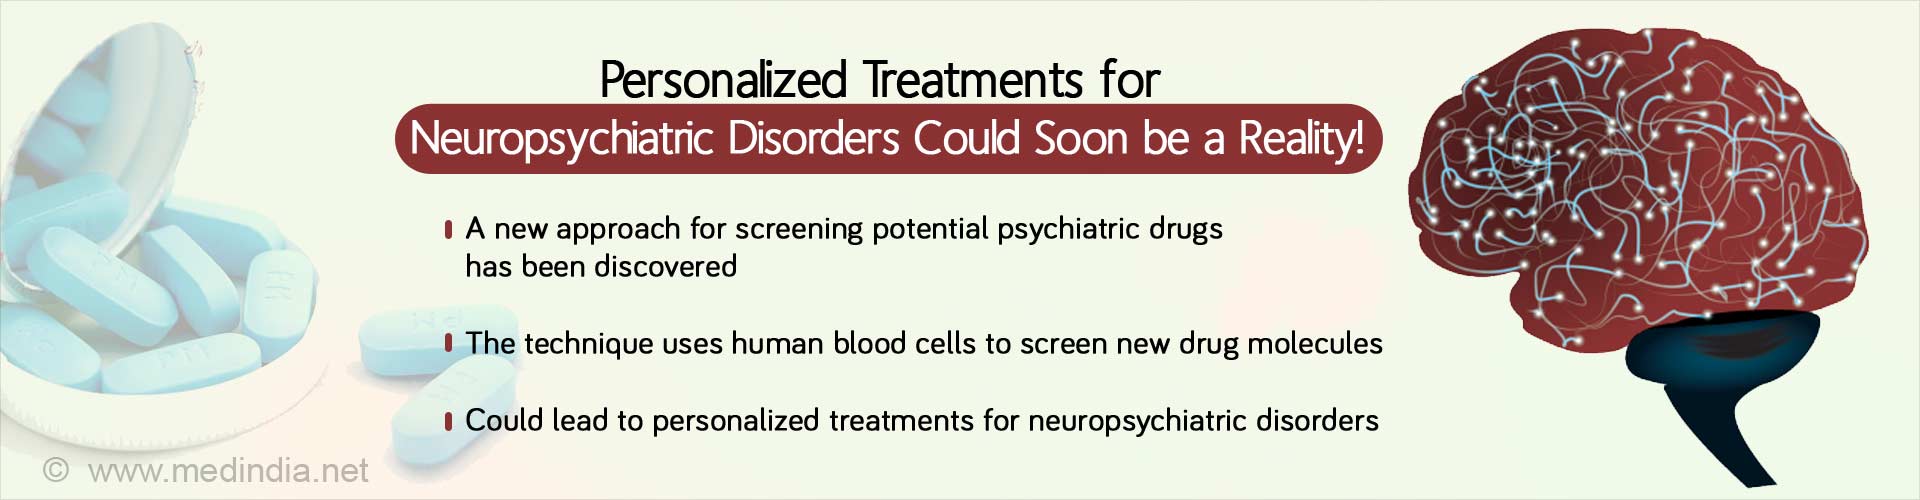 Personalized treatments for neuropsychiatric disorders could soon be a reality. A new approach for screening potential psychiatric drugs has been discovered. The technique uses human blood cells to screen new drug molecules. Could lead to personalized treatments for neuropsychiatric disorders.